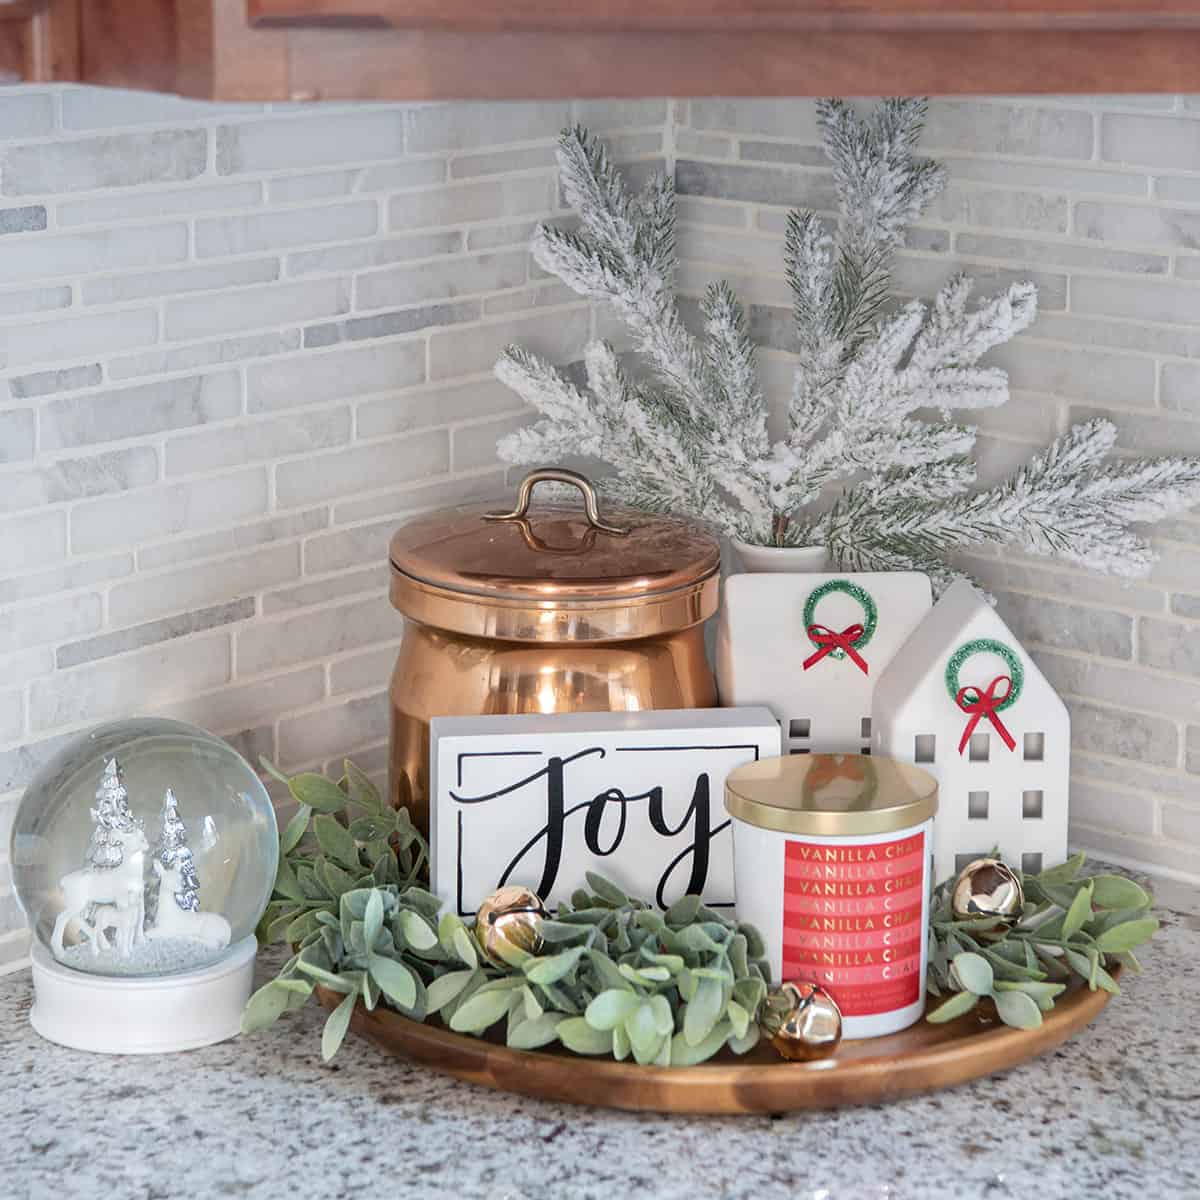 Colorful Christmas vignette with cookie jar, greenery, candle, and snow globe on a kitchen countertop.